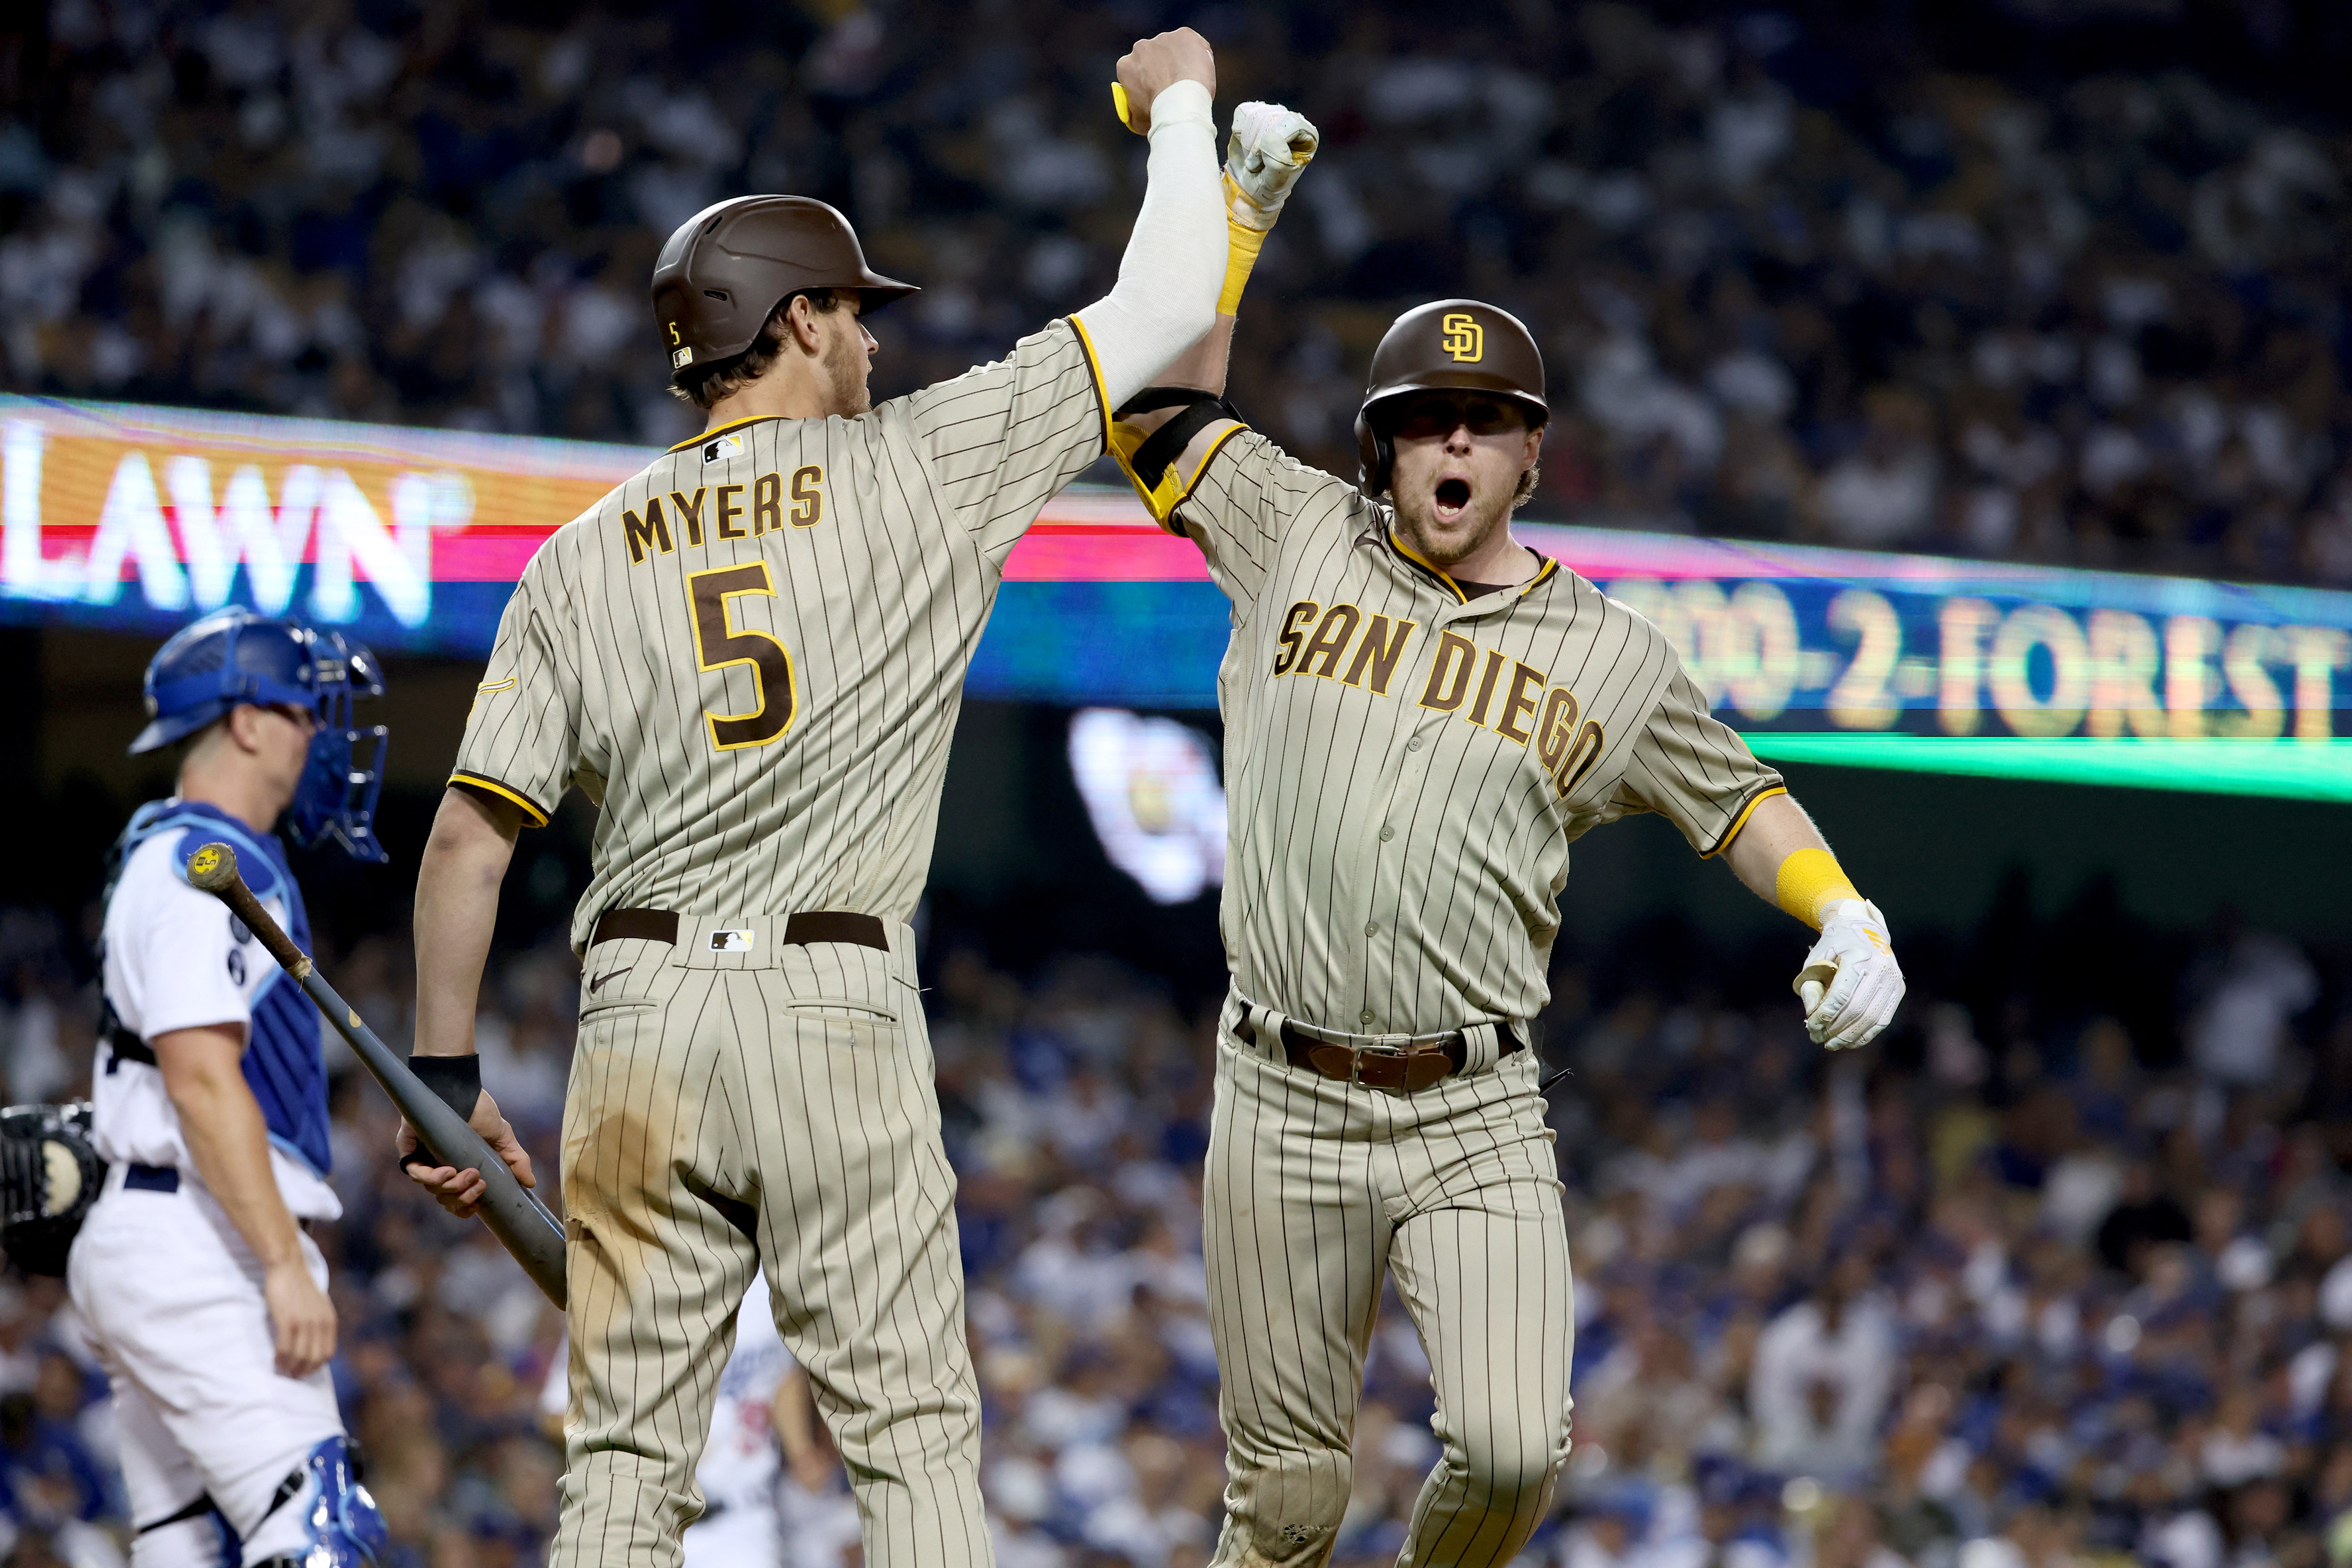 Dodgers lose 5-3, get swept by Padres